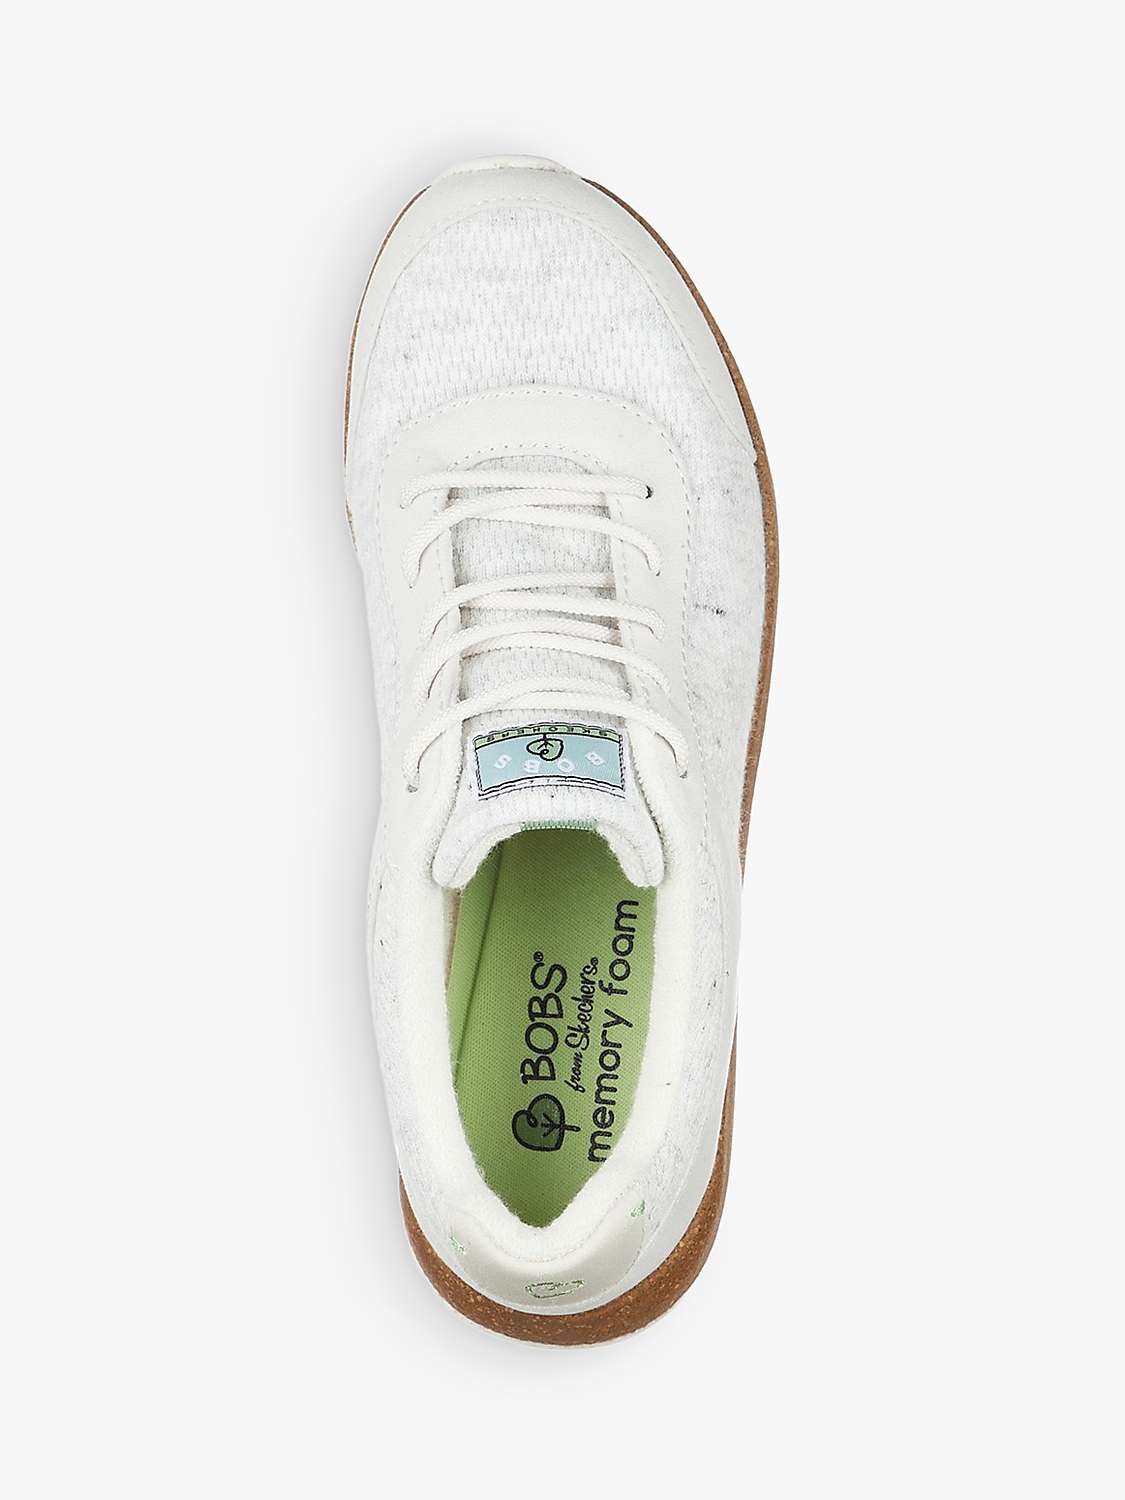 Buy Skechers BOBS Earth Lace Up Trainers Online at johnlewis.com